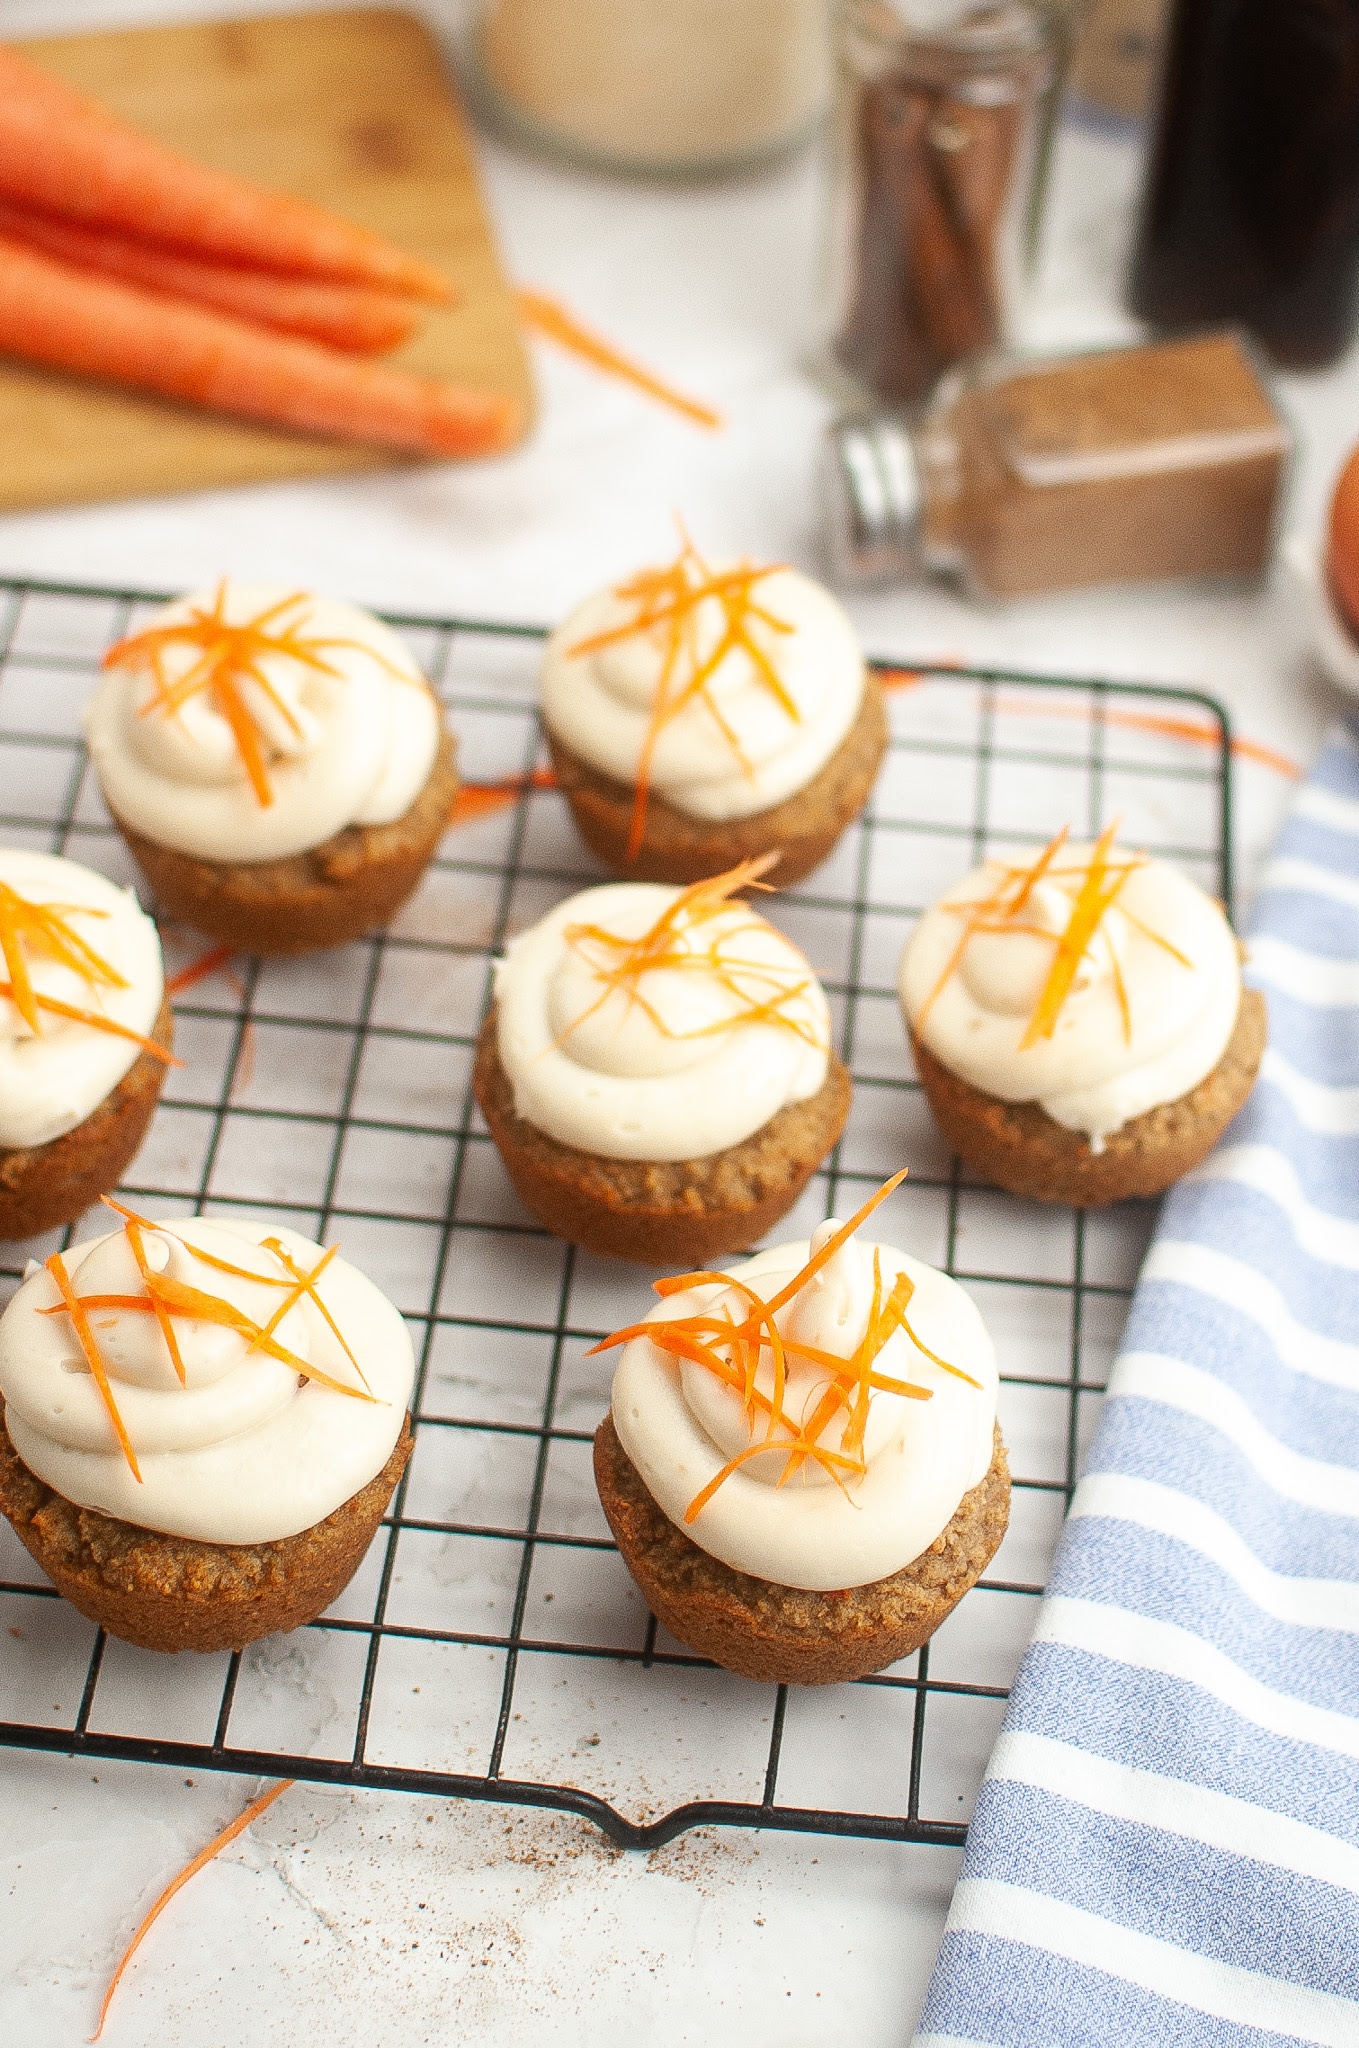 Grain-free carrot cake cupcakes with cream cheese frosting and carrot zest garnish on a cooling rack.